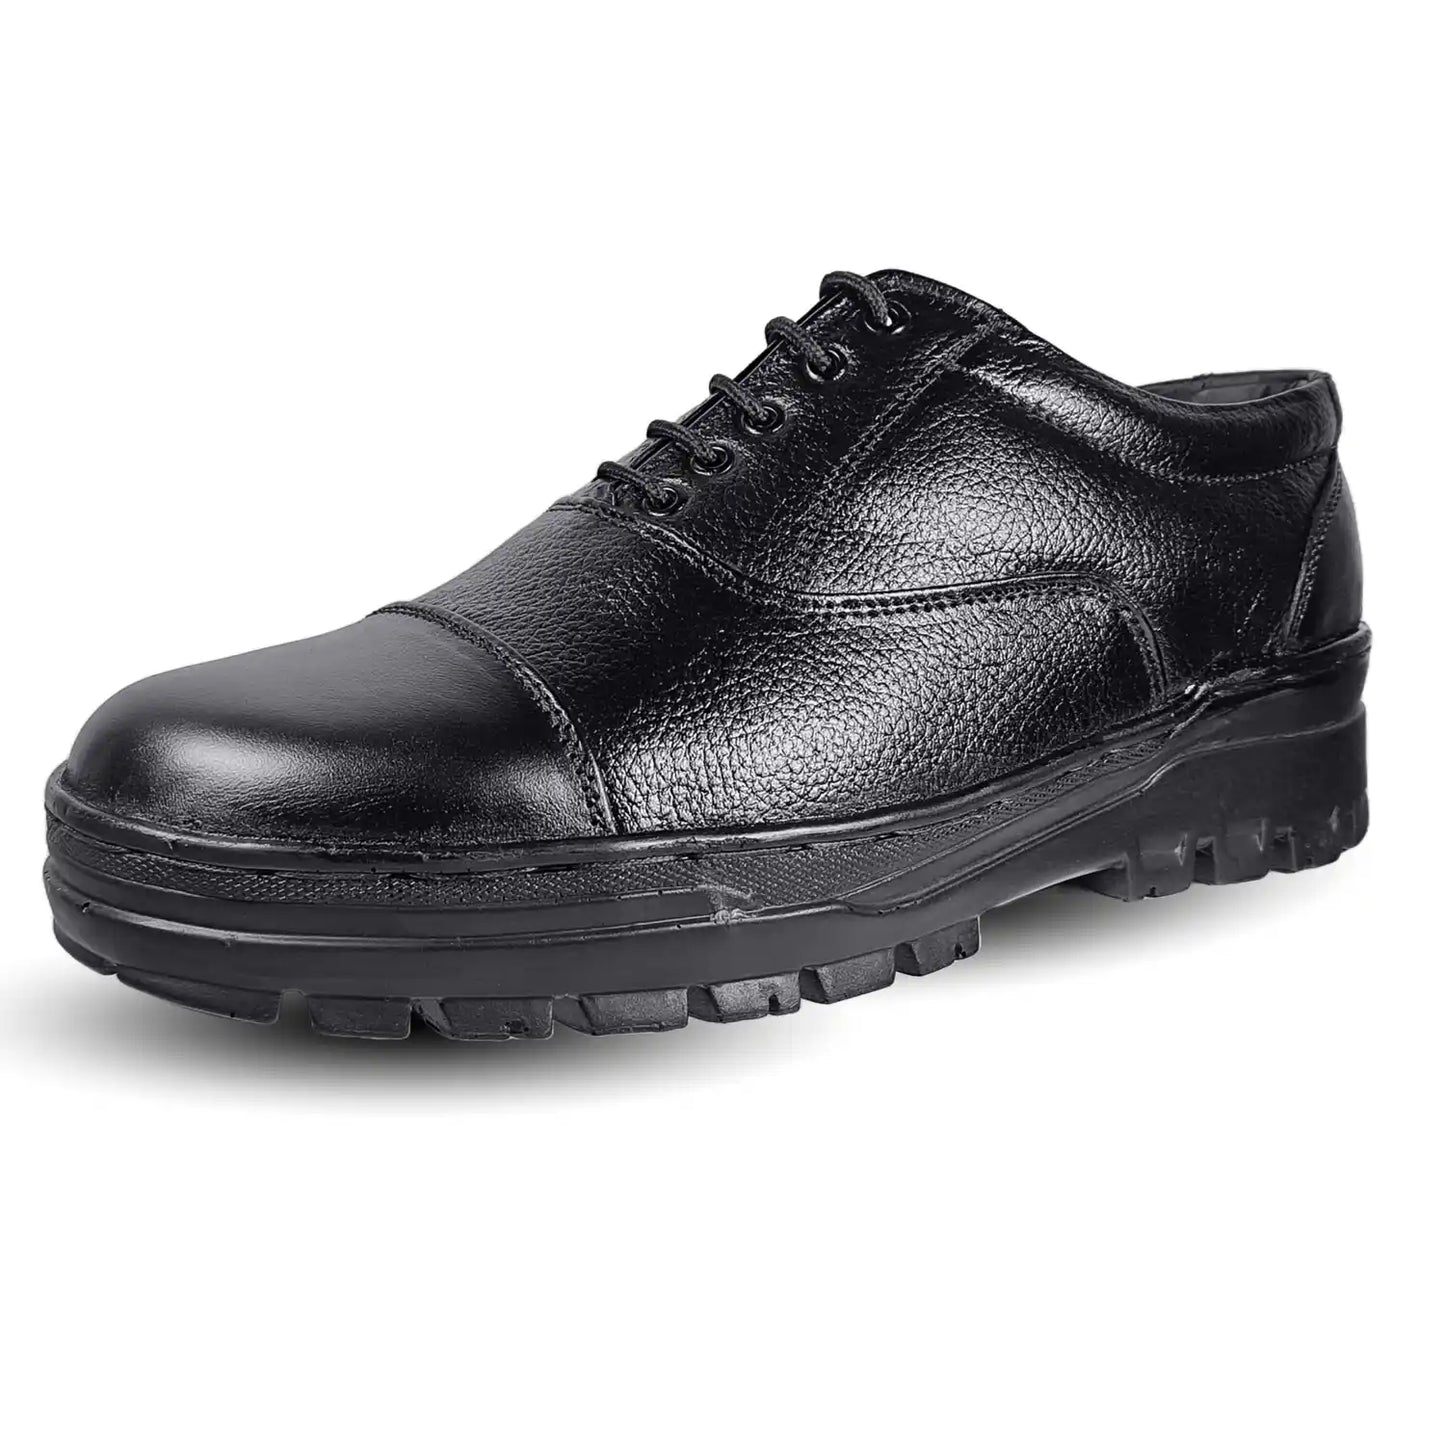 Police Uniform Shoes Pure Leather Oxford Lace Up